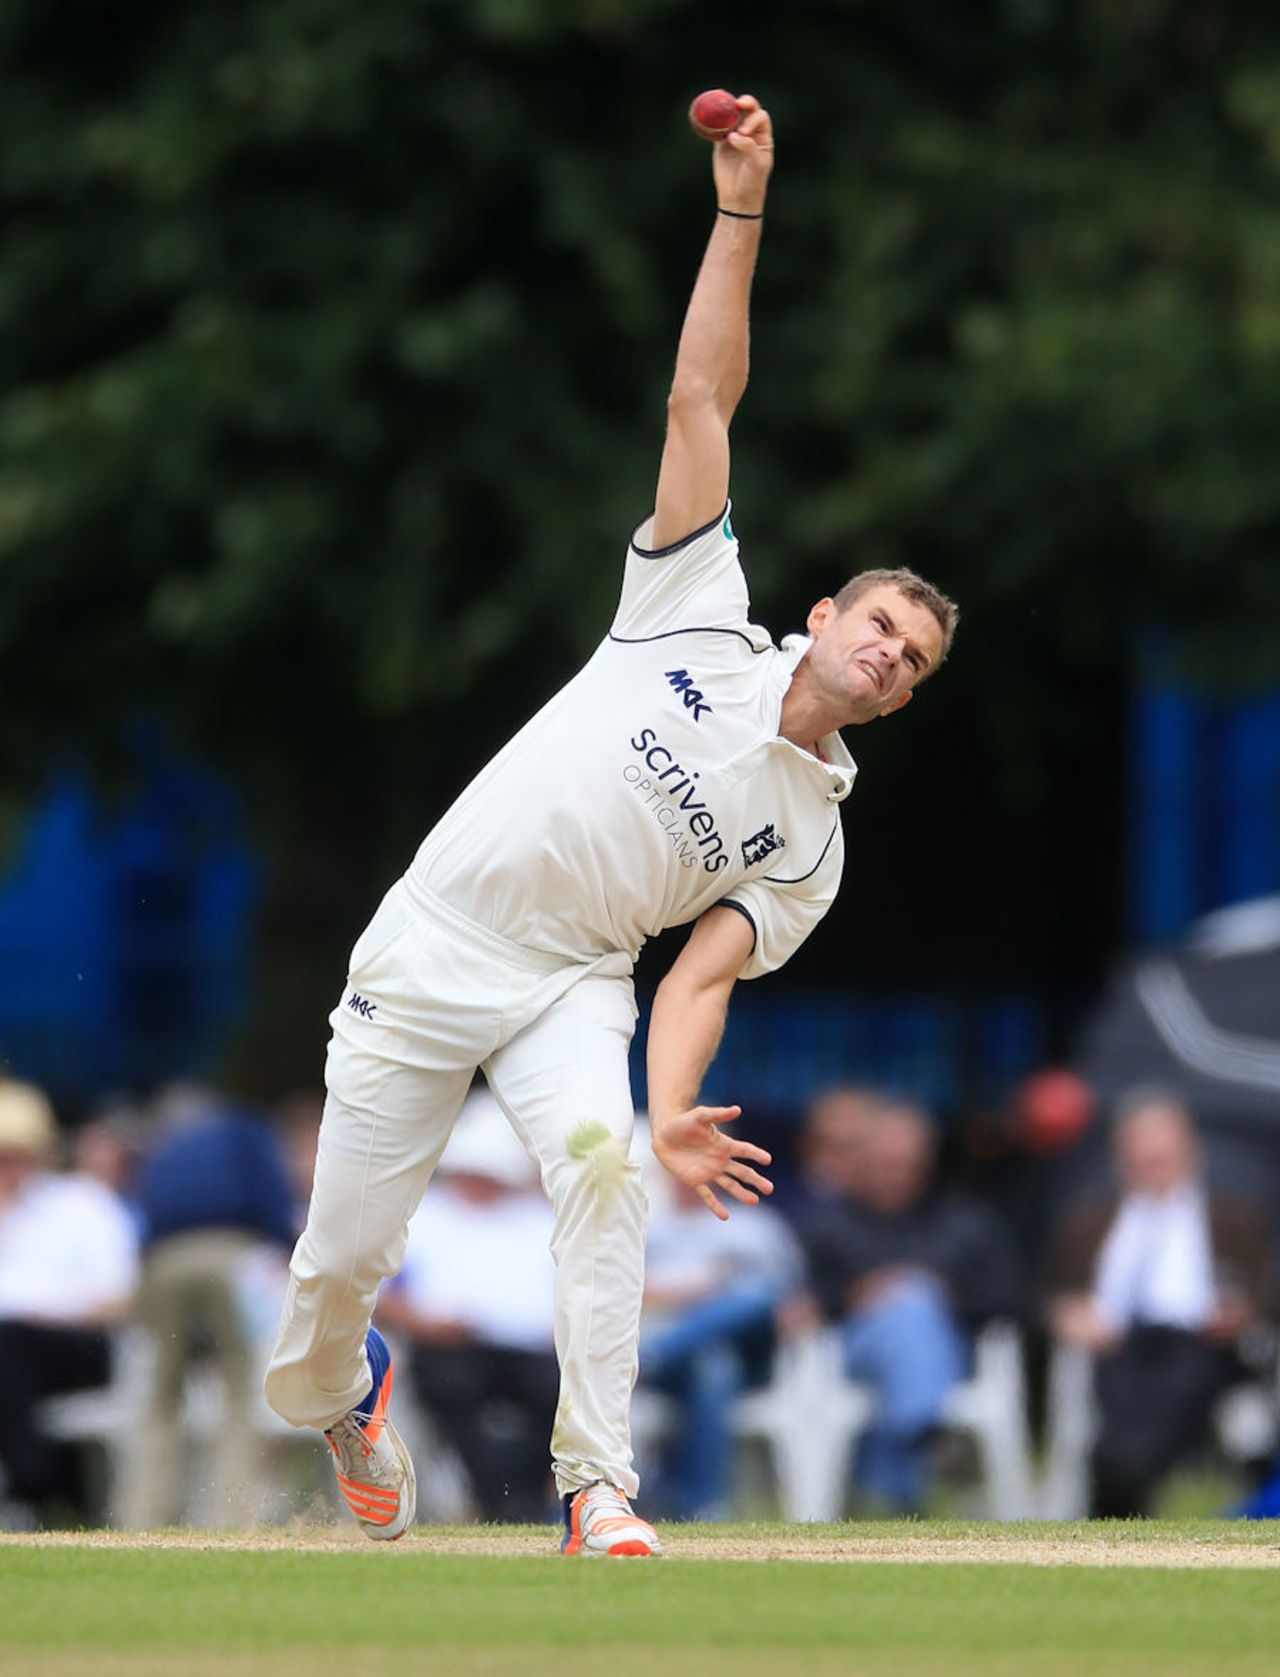 Josh Poysden in action for Warwickshire, Surrey v Warwickshire, Specsavers Championship Division One, Guildford, July 5, 2016